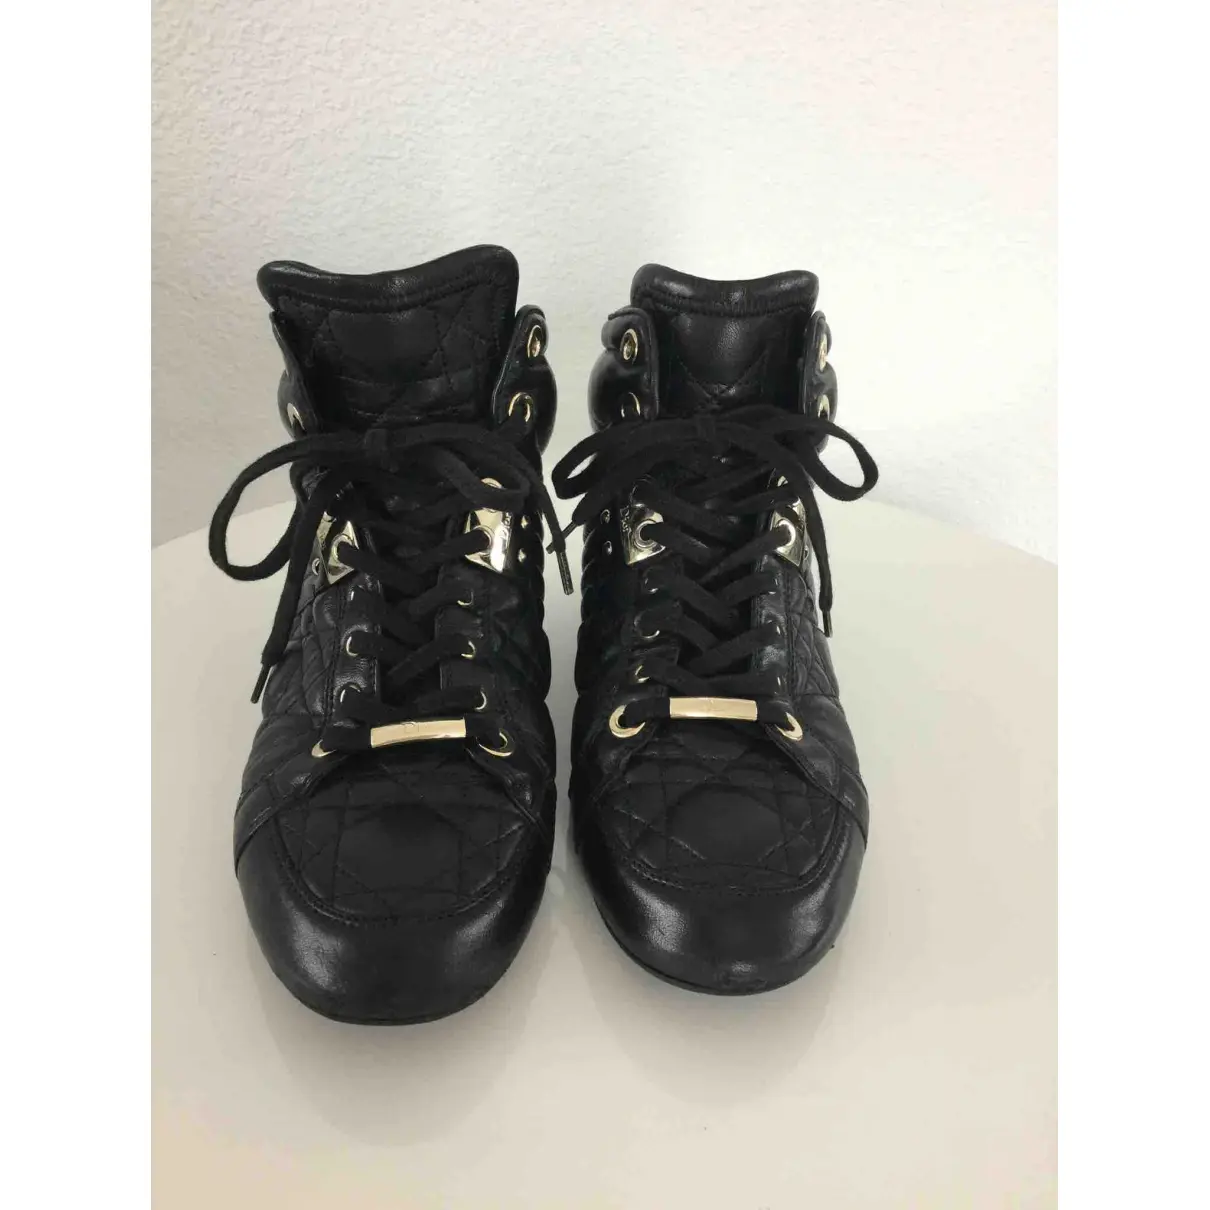 Leather trainers Dior